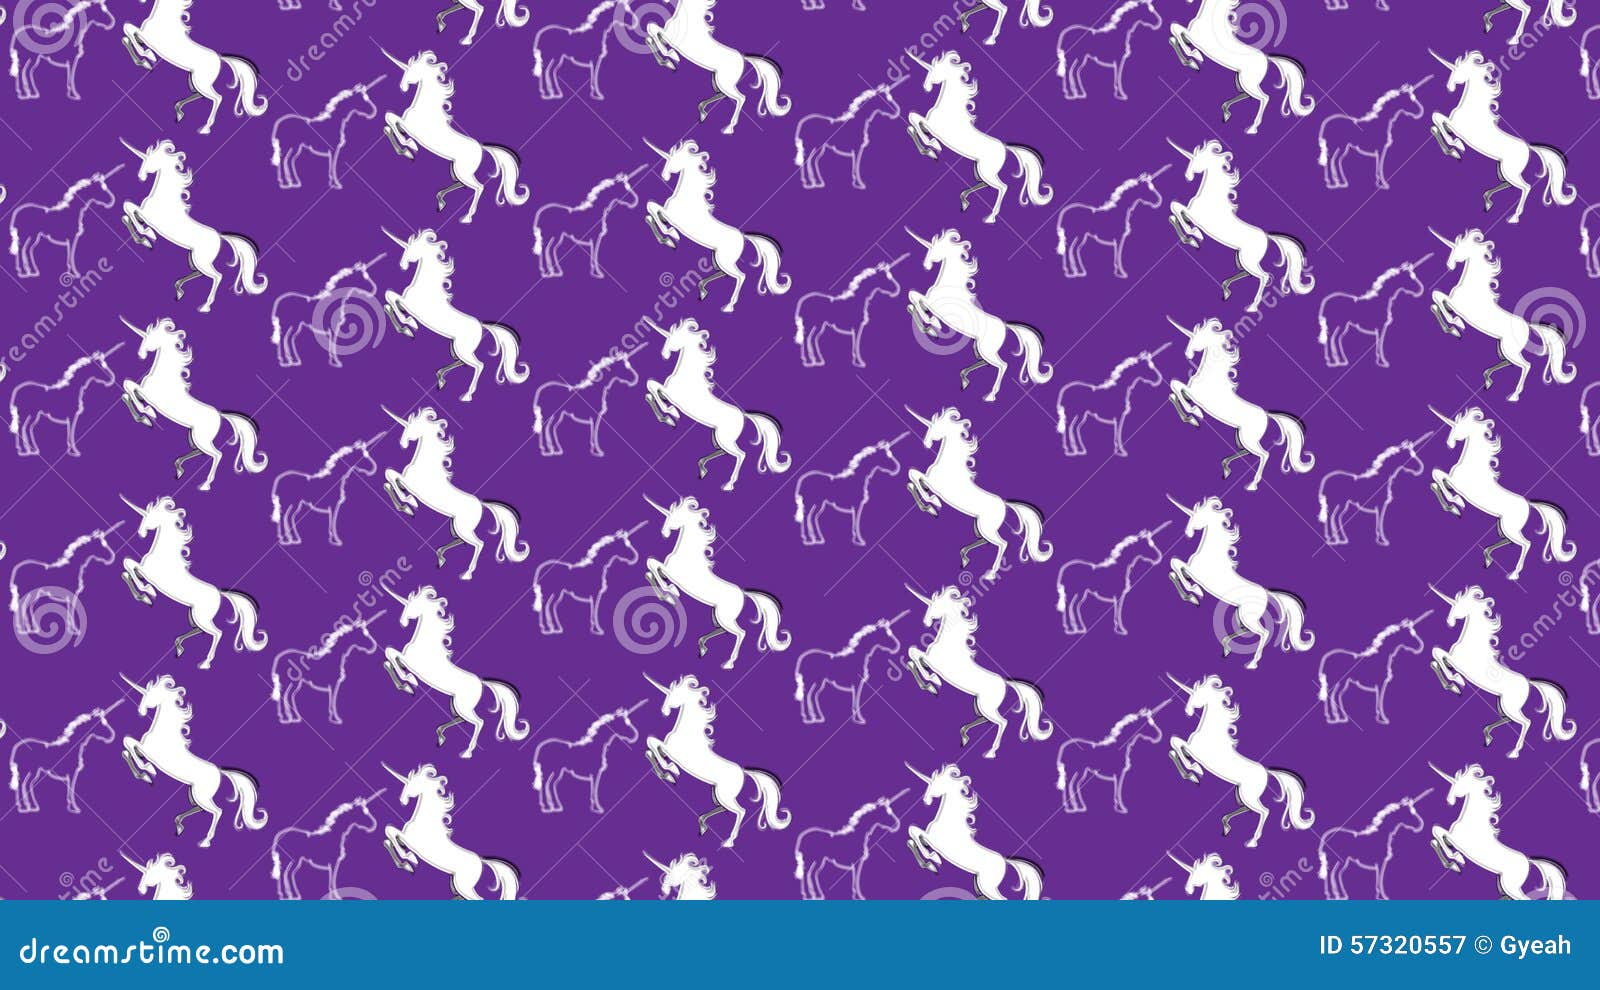 simple purple background with some unicorns